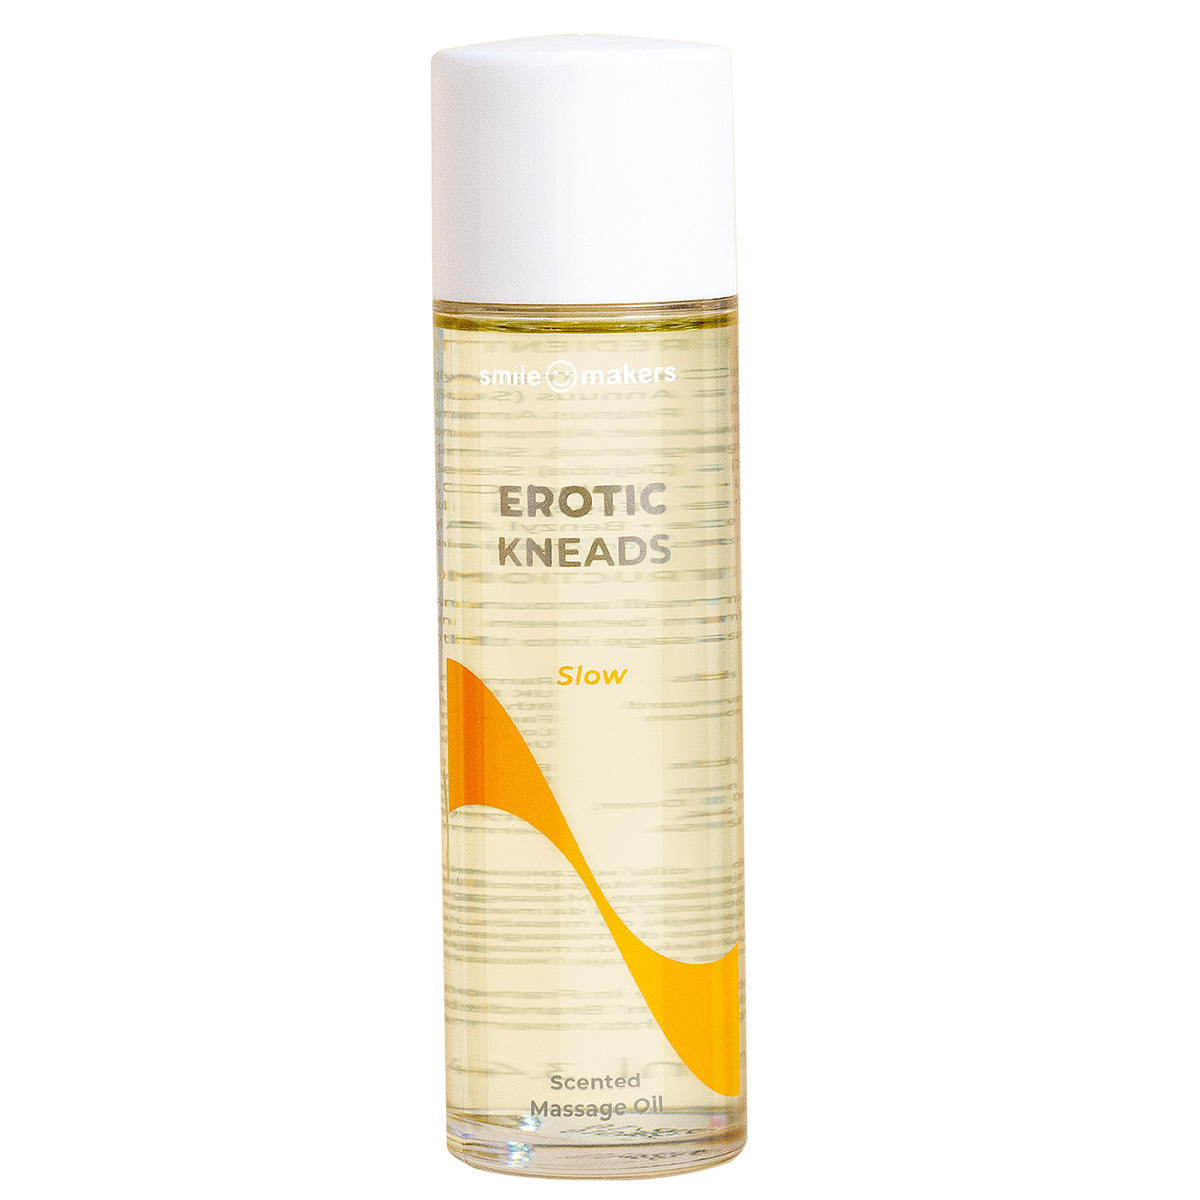 smile makers EROTIC KNEADS Slow 100 ml - 1